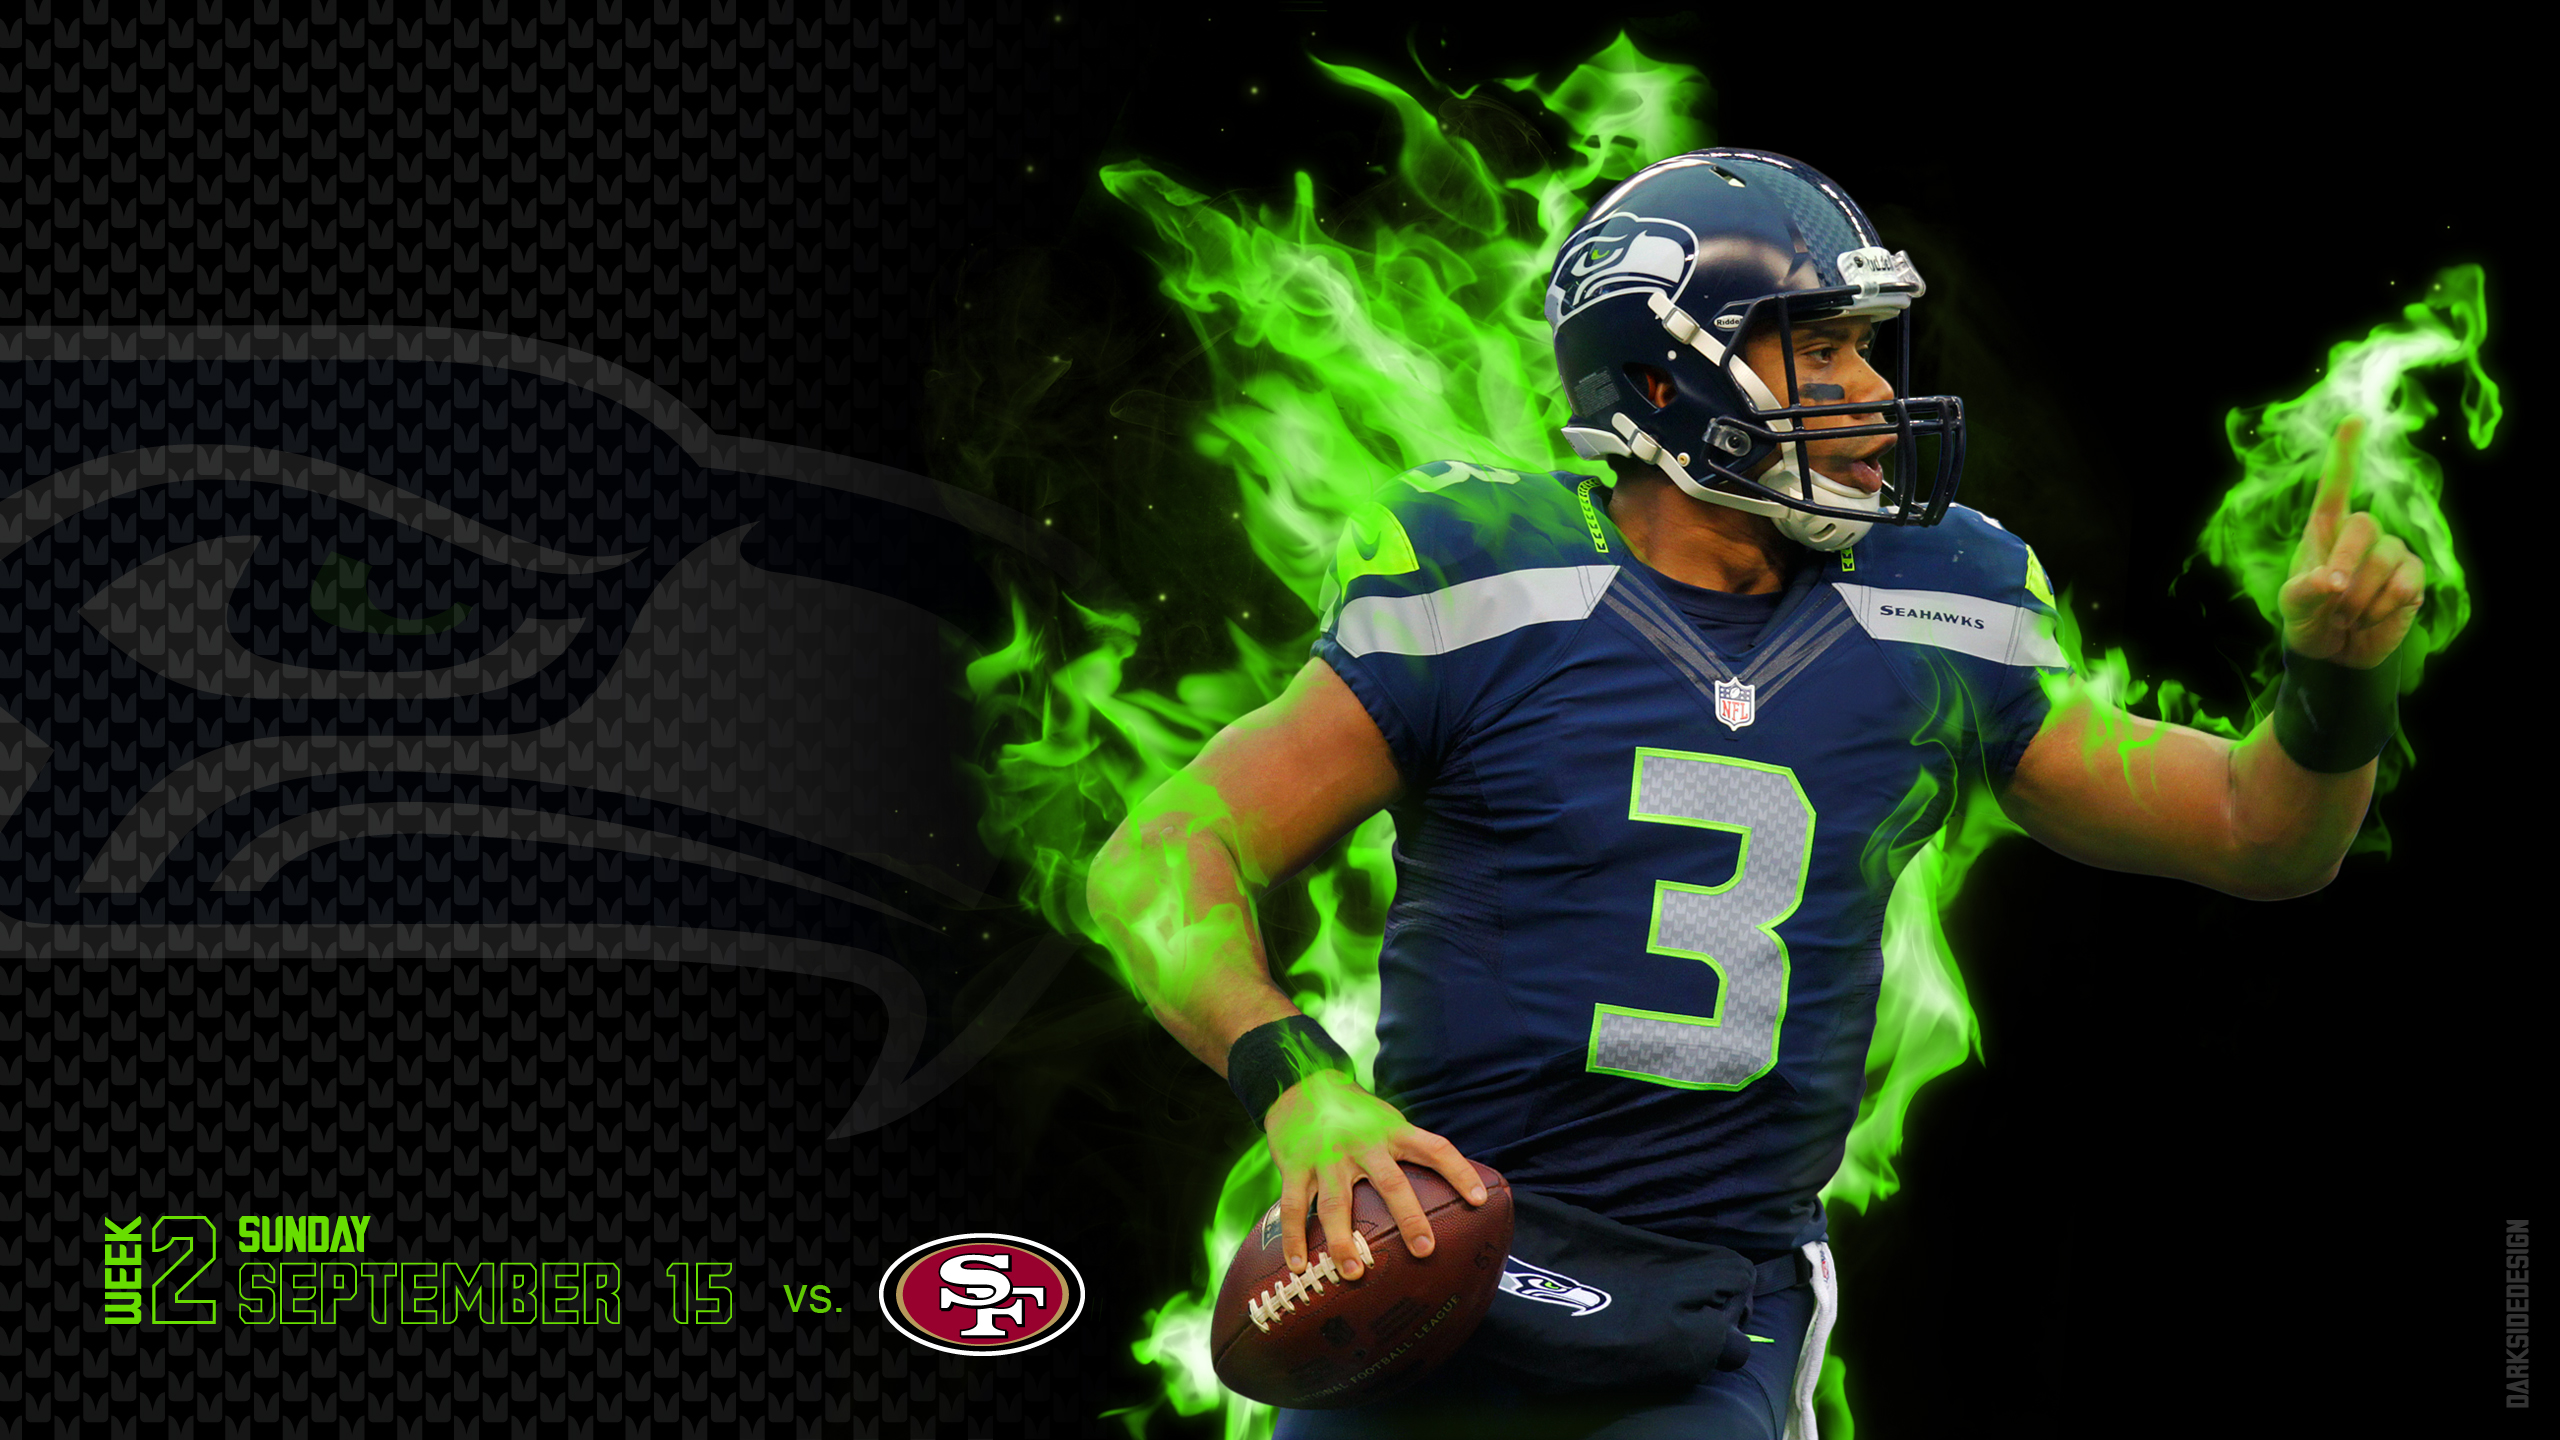 Hd Wallpaper Seahawks Free HD Wallpapers   ImgHD Browse and